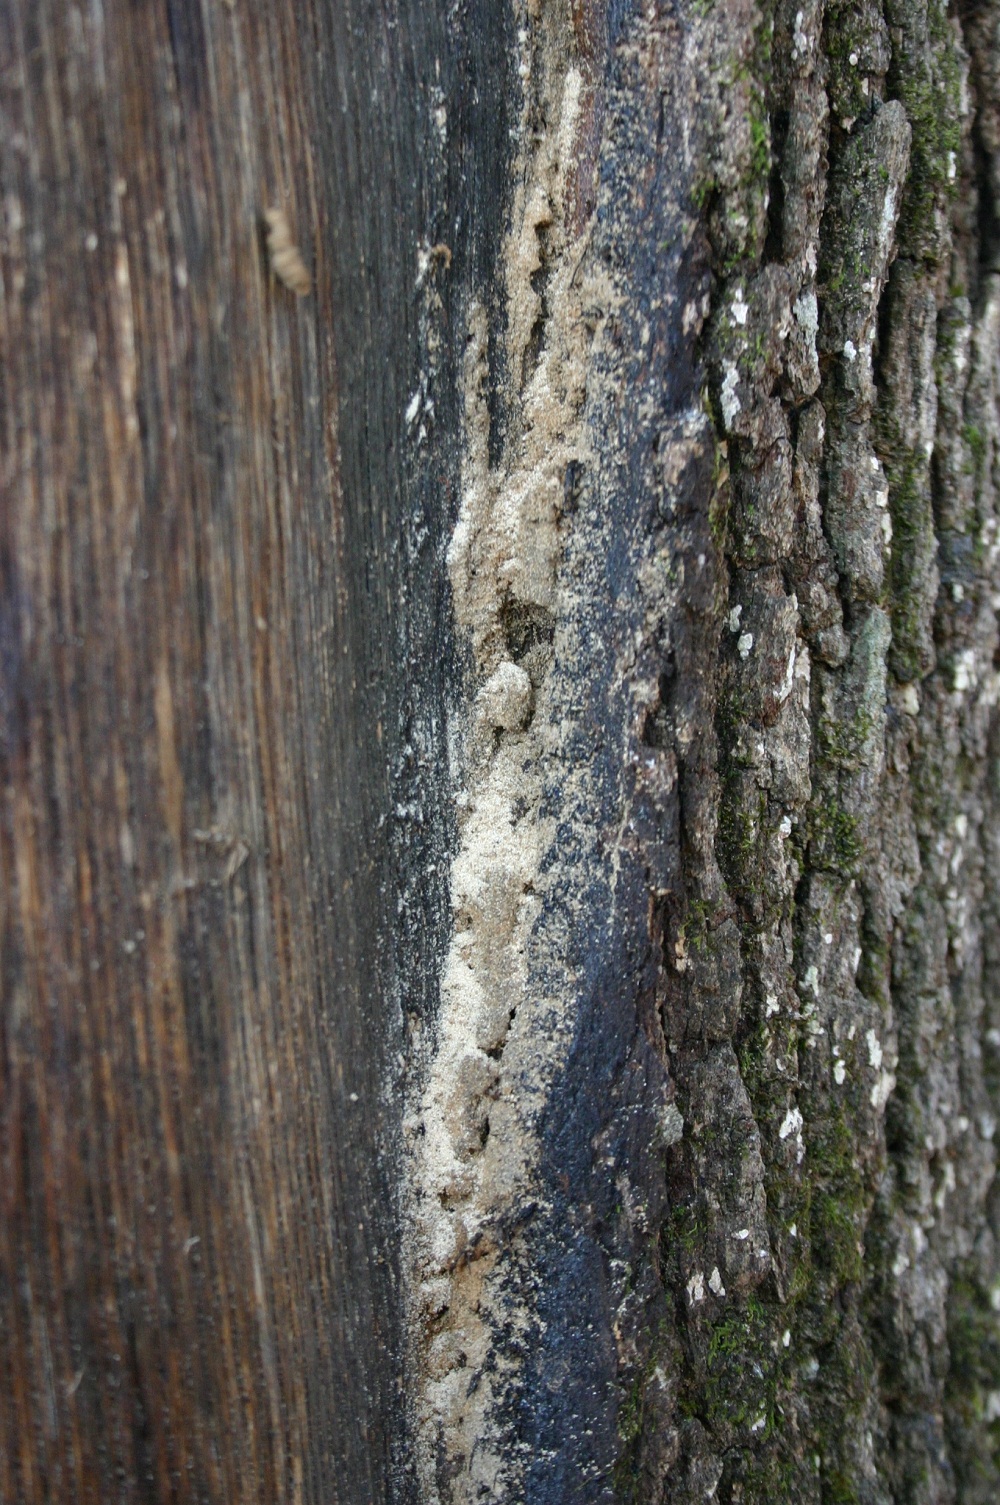 insect damage